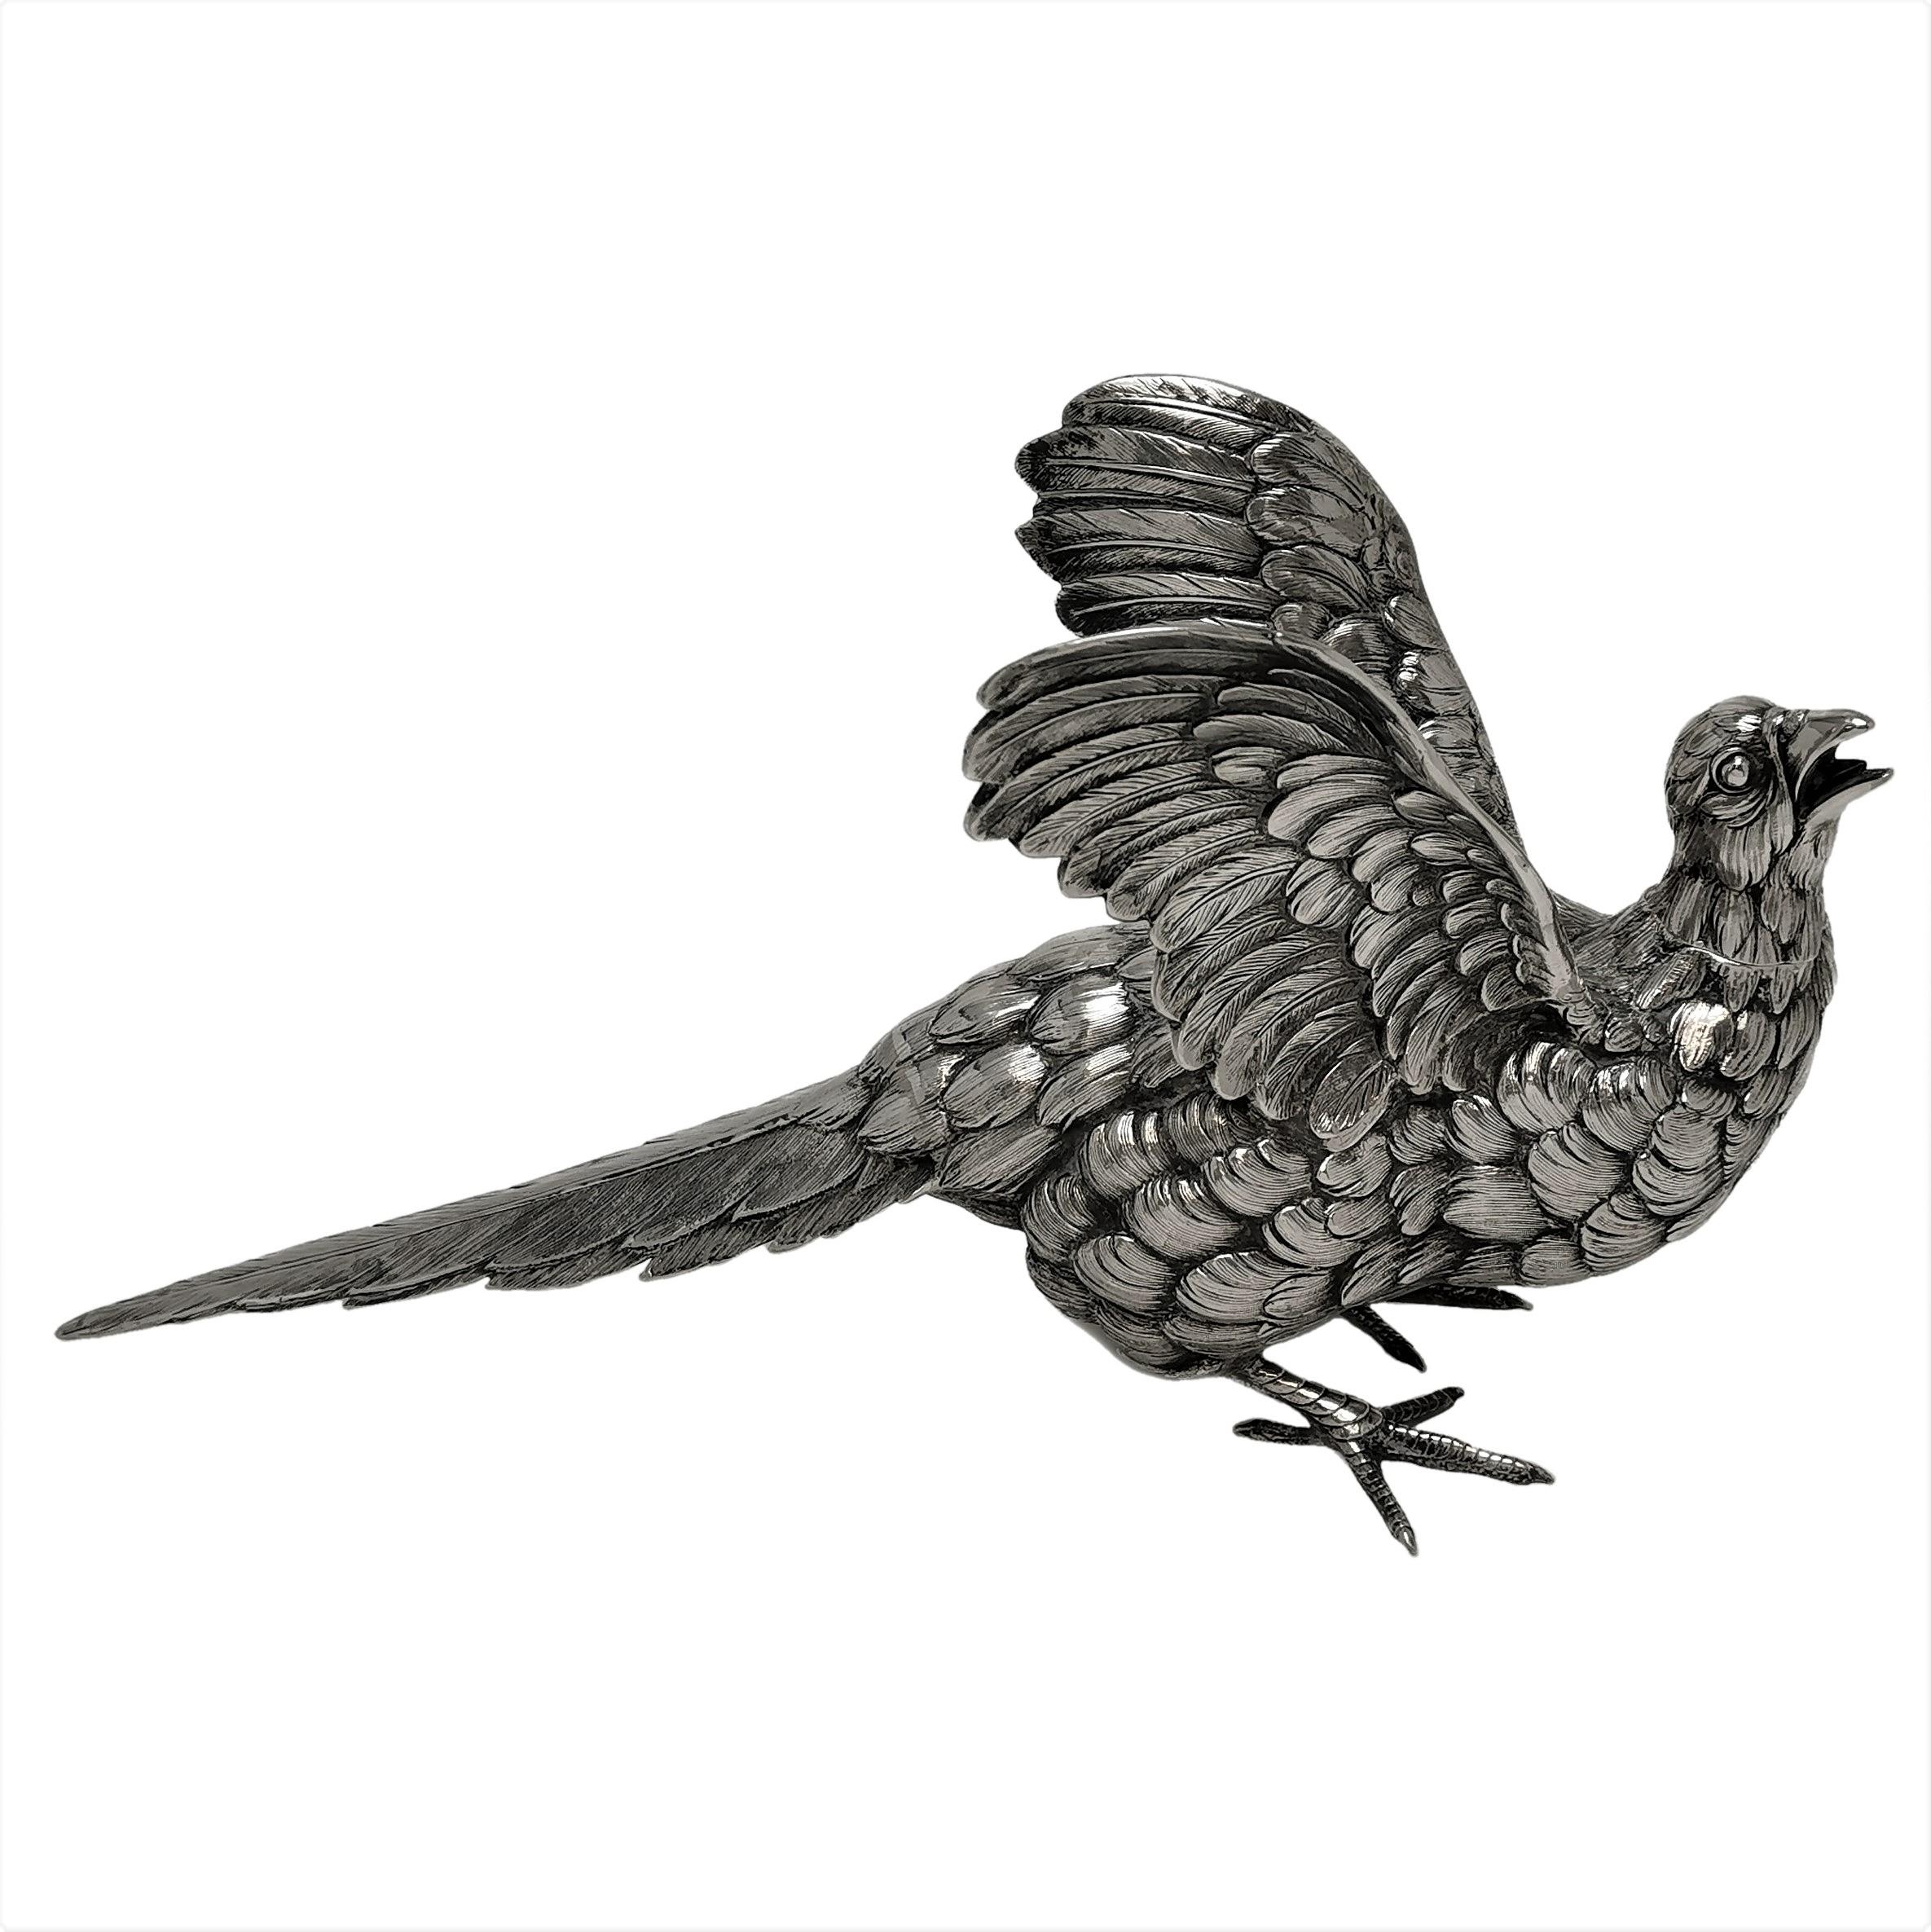 An impressive Antique Solid Silver model Pheasant Bird, modelled in a state of motion with its wings raised and head drawn back. The bird has good attention paid to the detailing in the feathers.

Made in Germany in c. 1900.
Made in 800 Standard